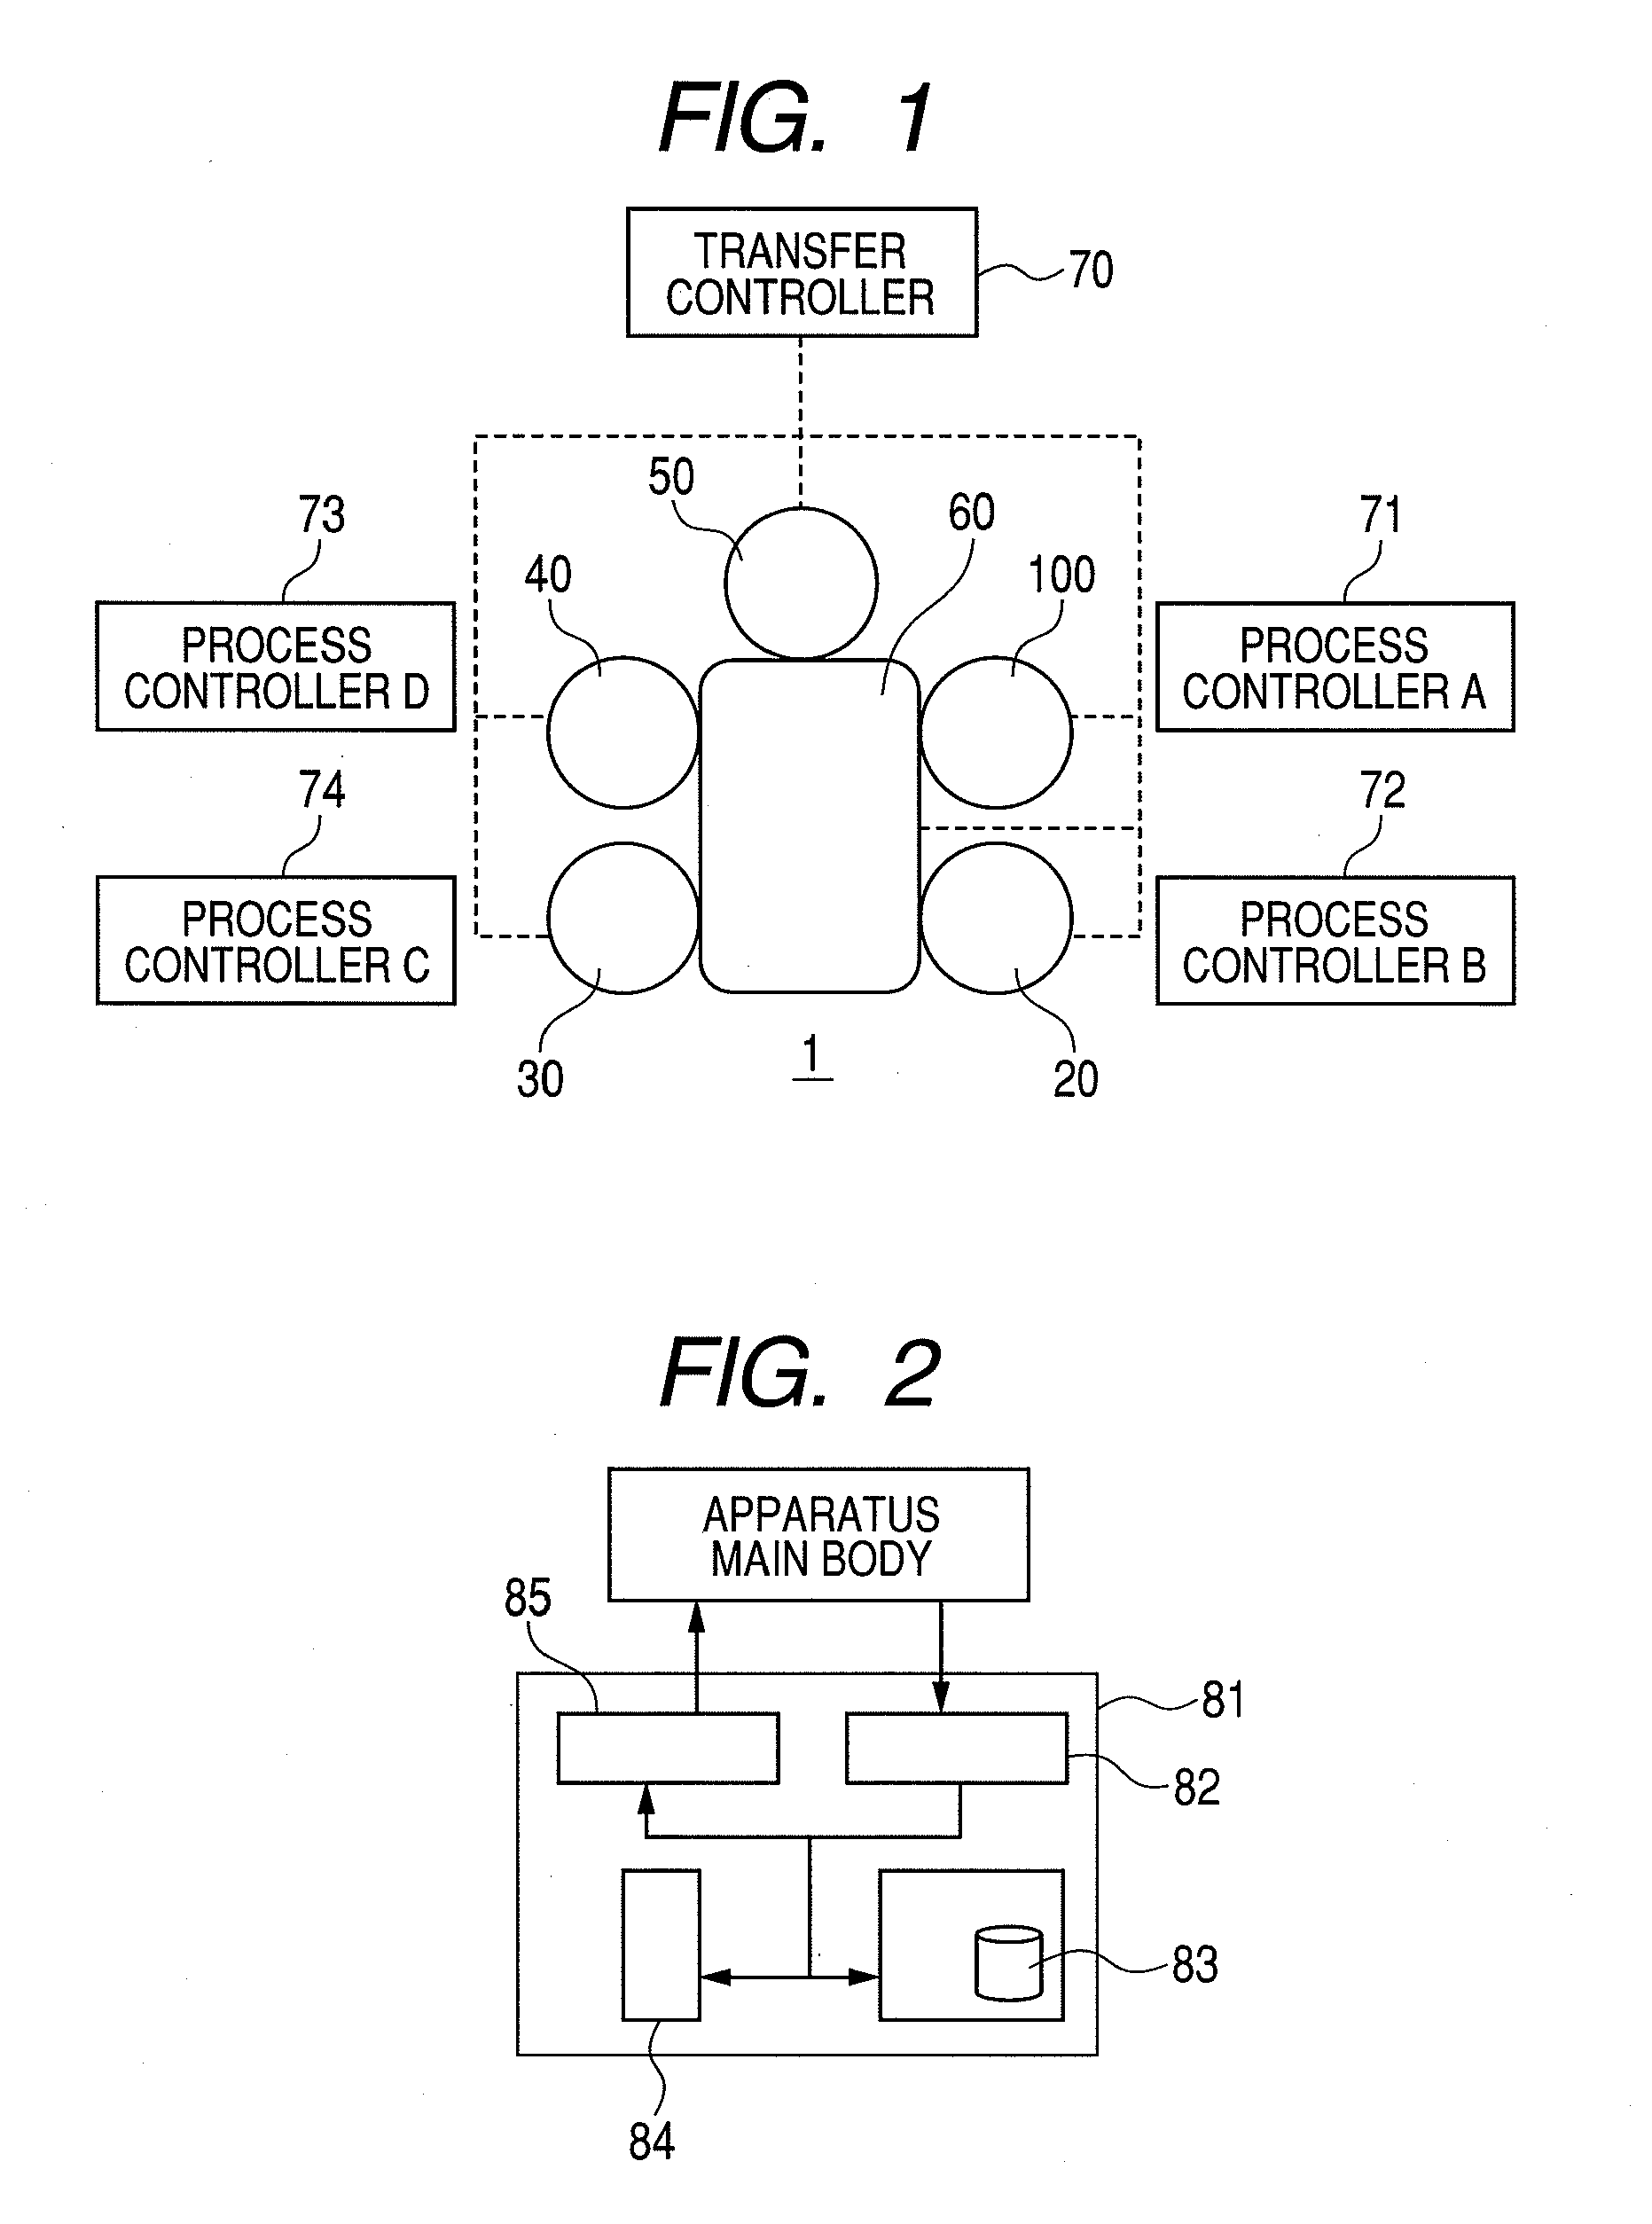 Substrate cleaning method for removing oxide film